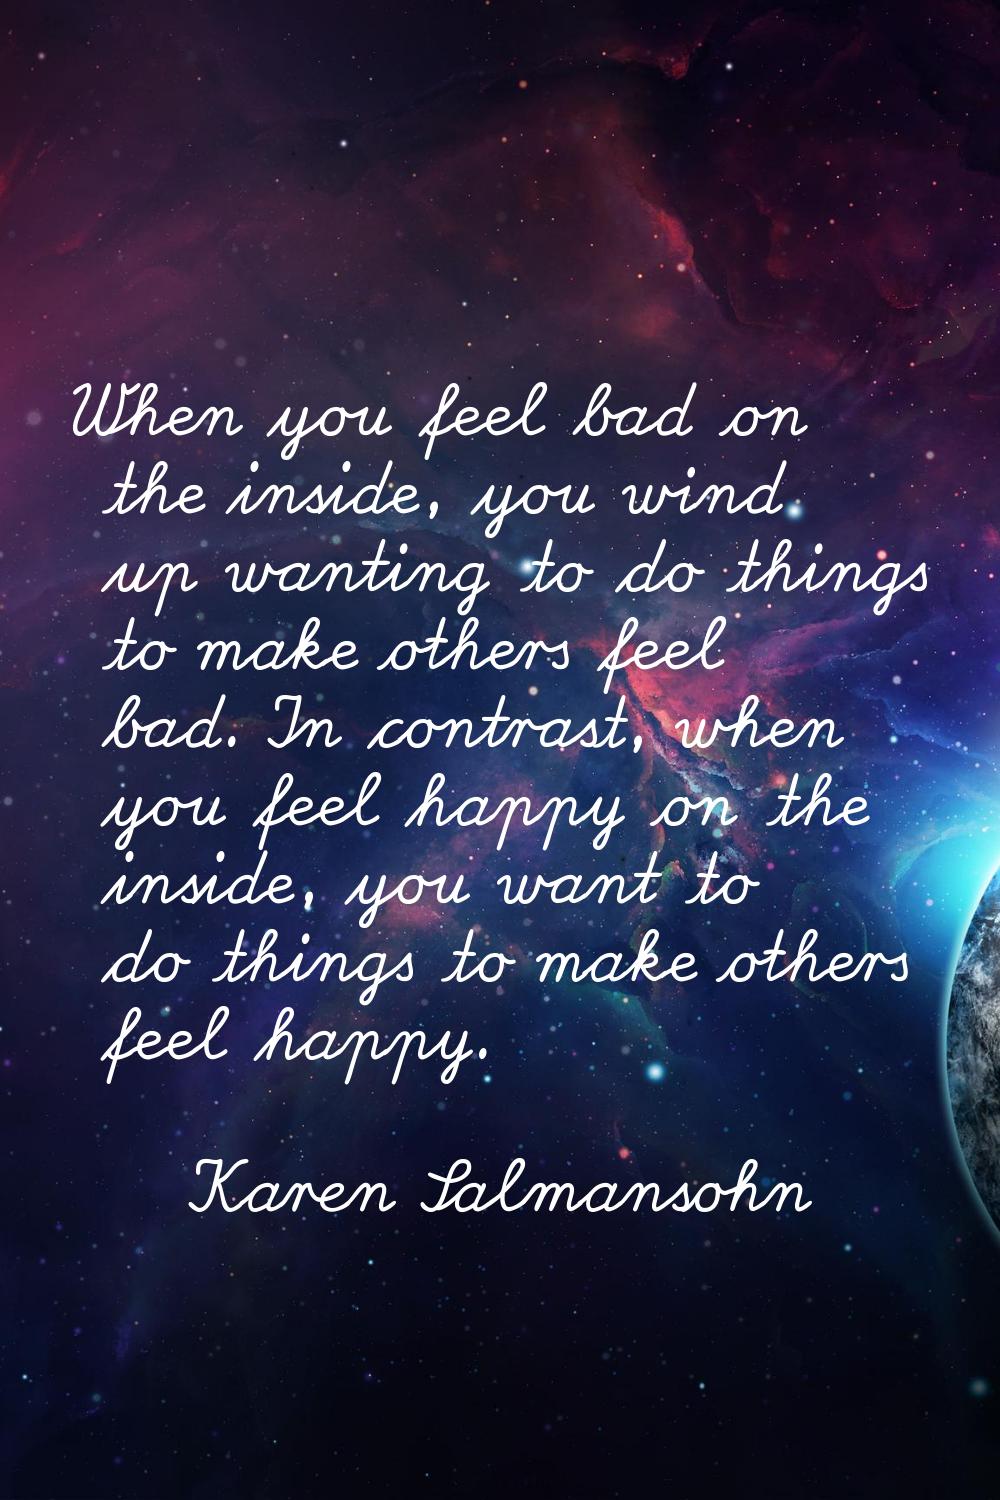 When you feel bad on the inside, you wind up wanting to do things to make others feel bad. In contr